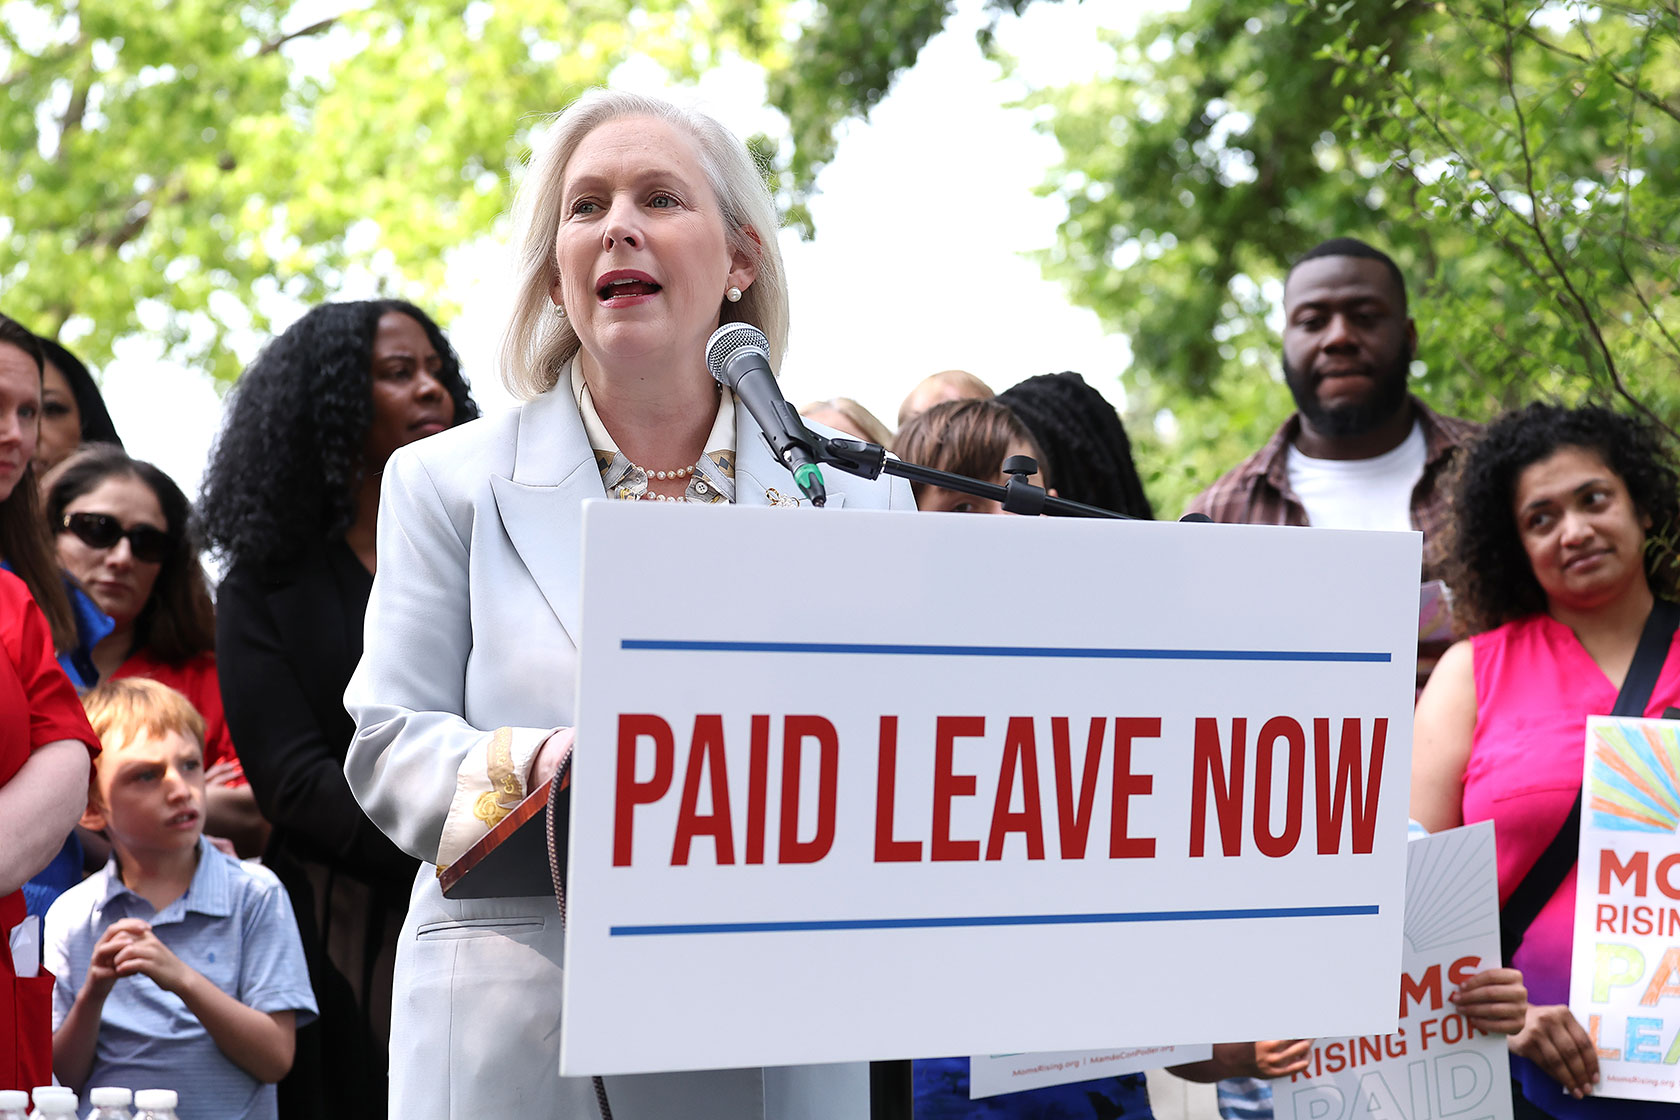 Photo shows Kirsten Gillibrand wearing all white, speaking at a podium with a sign in front of it that says 